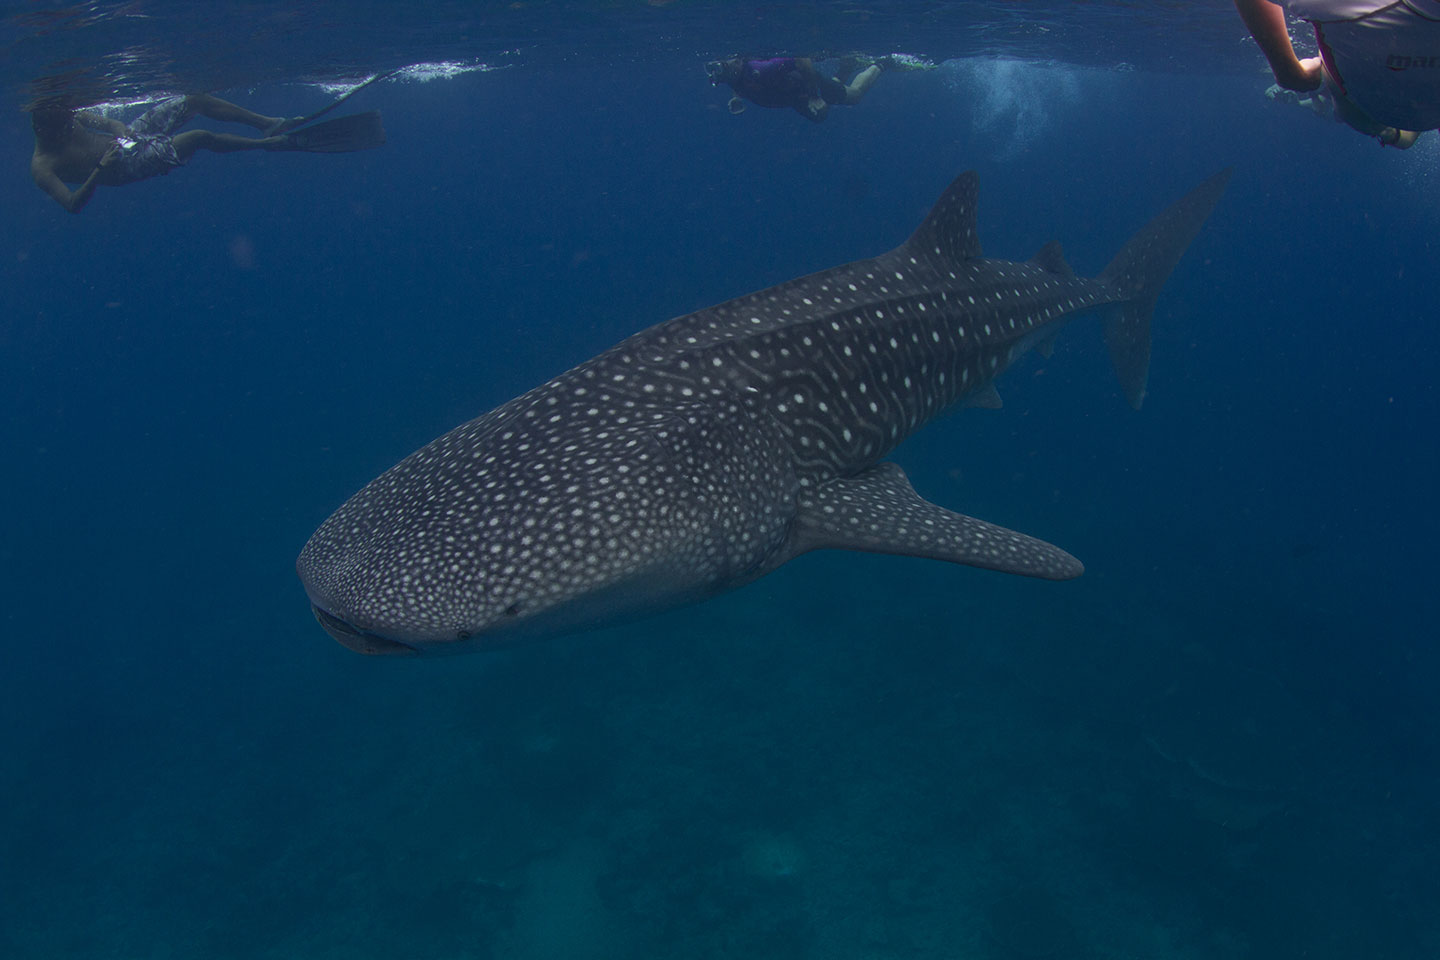 A whale shark in the ocean with scuba divers present